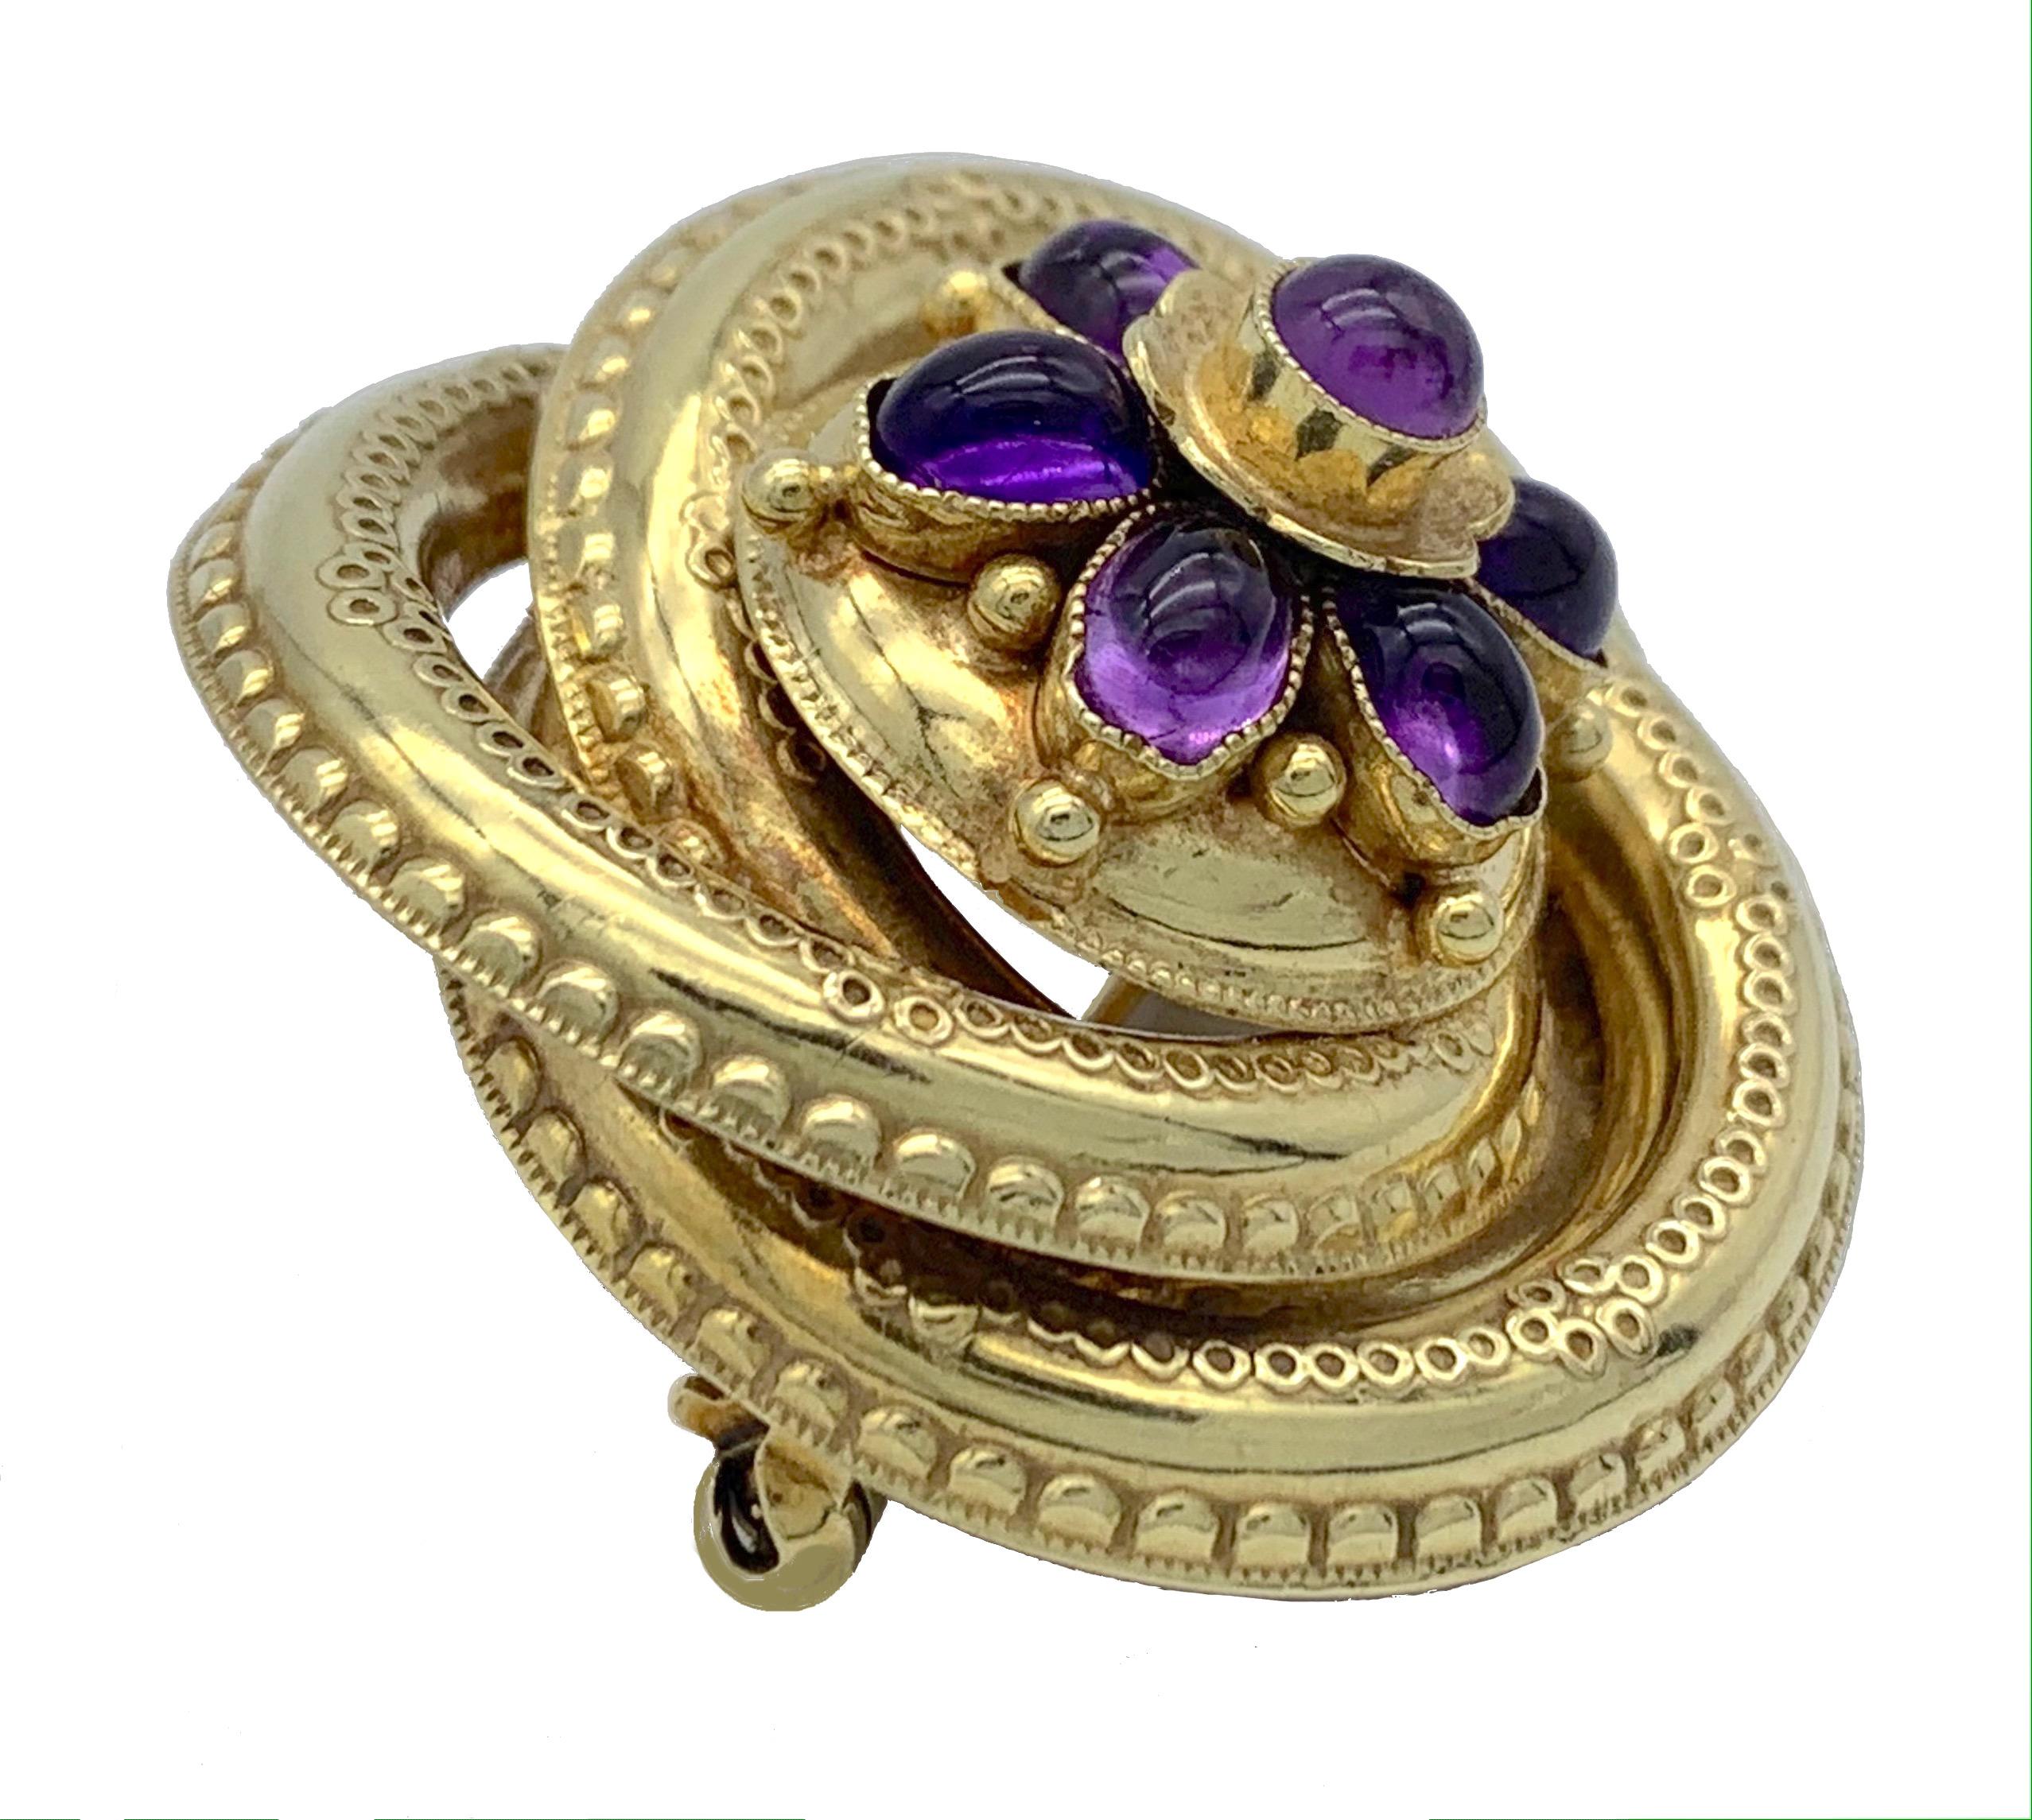 This striking victorian brooch is designd as an entwined eternity knot. The centre of the brooch is decorated with a large flower. Seven flower petals are set with oval cut amethyst cabochons. The centre of the flower is set with a round cut